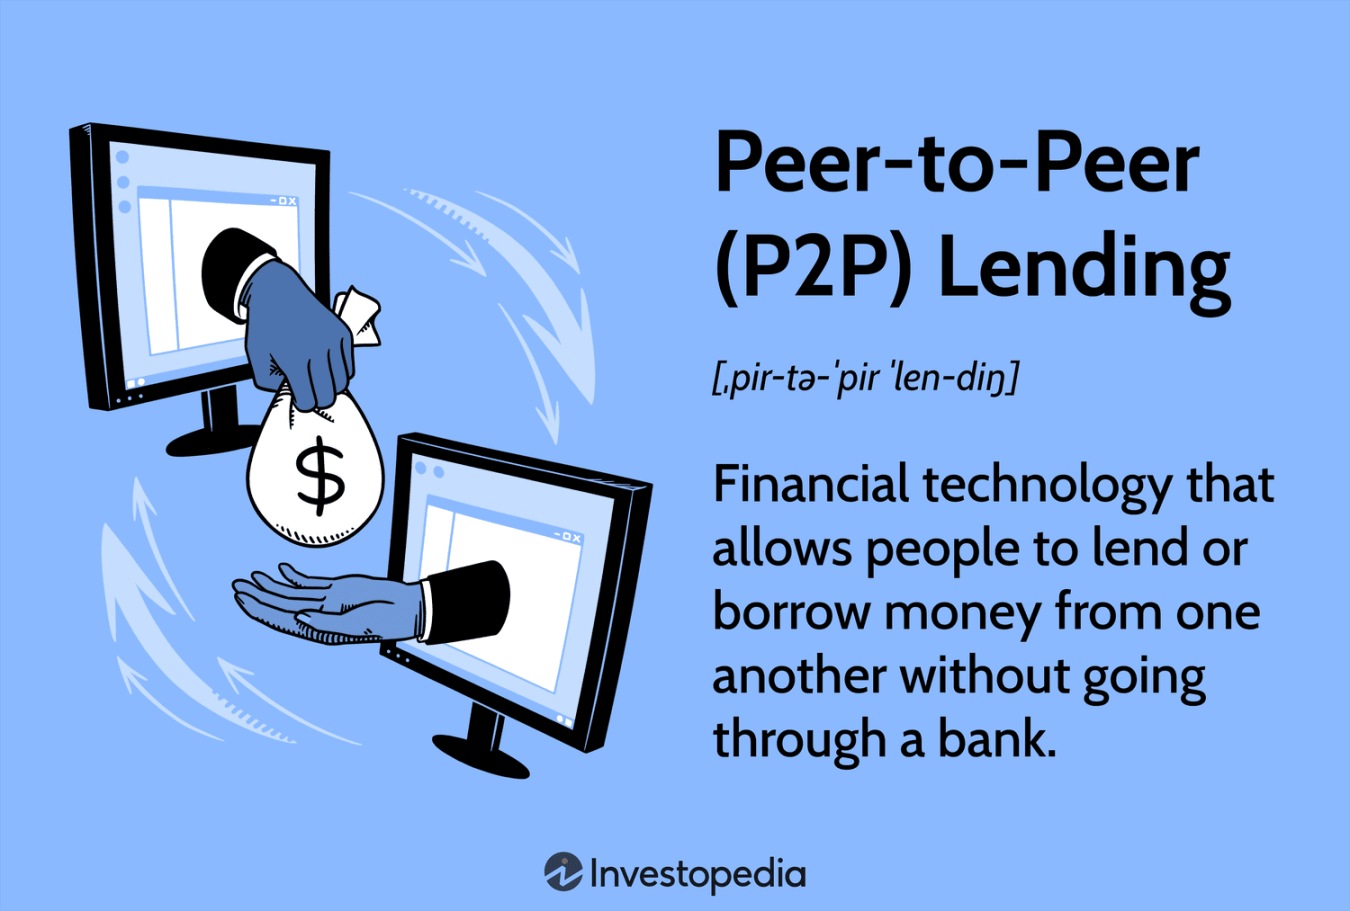 What Is Peer-to-Peer (PP) Lending? Definition and How It Works